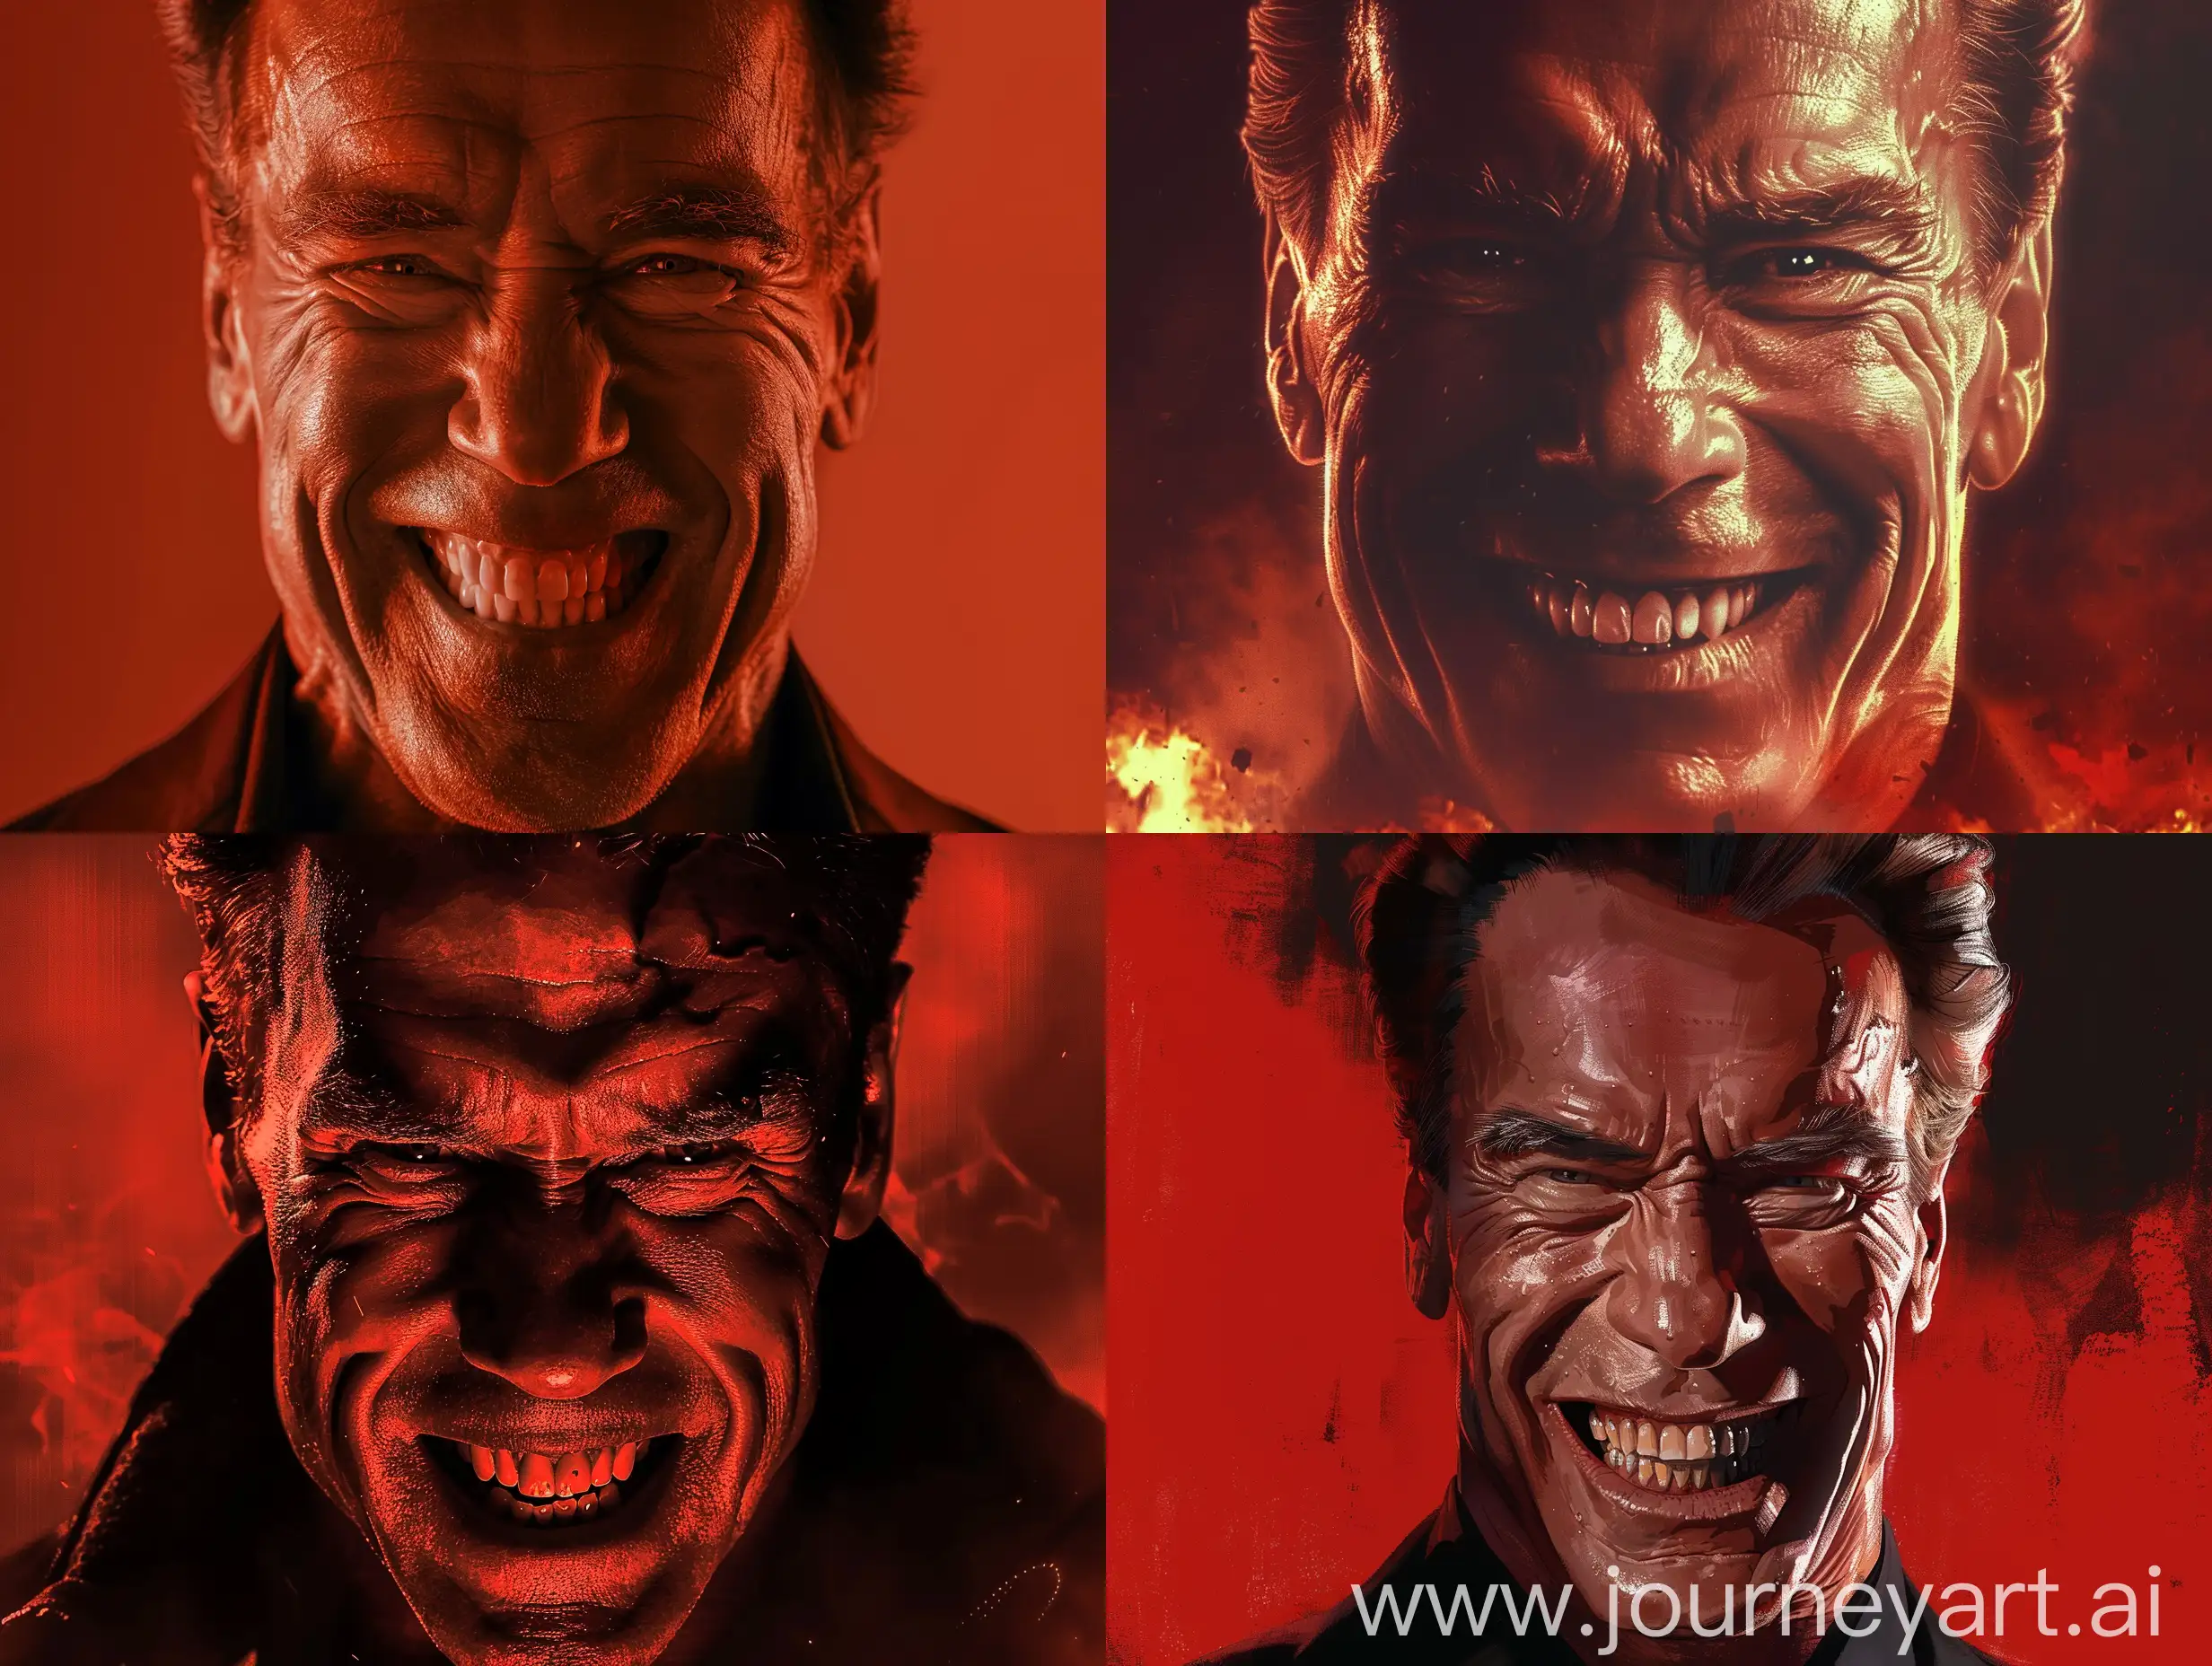 YouTube thumbnail depicting the concept 'Dark Side of Being Famous: Arnold Schwarzenegger'. The thumbnail should prominently feature Arnold Schwarzenegger with a villainous smile, not showing teeth. The image should be detailed and realistic, conveying the dual nature of fame and its potential darker aspects, without any text overlaid on the thumbnail. The background should be neutral to emphasize Schwarzenegger's expression and devilish features, with a reddish color tone, The head turns slightly to the left, half body